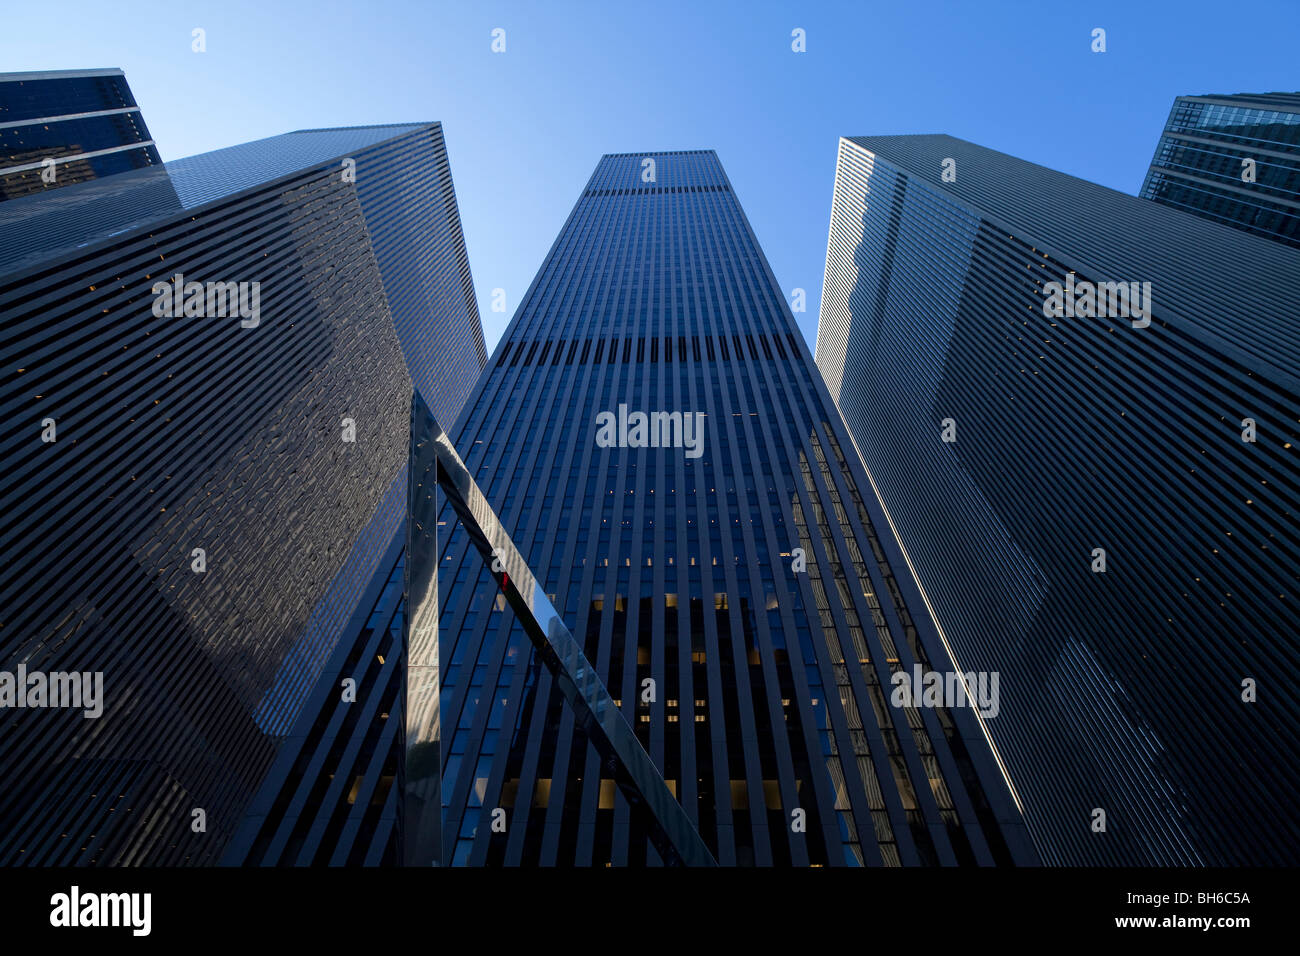 USA, New York City, Manhattan, low angle view of skyscrapers of Sixth Avenue Stock Photo